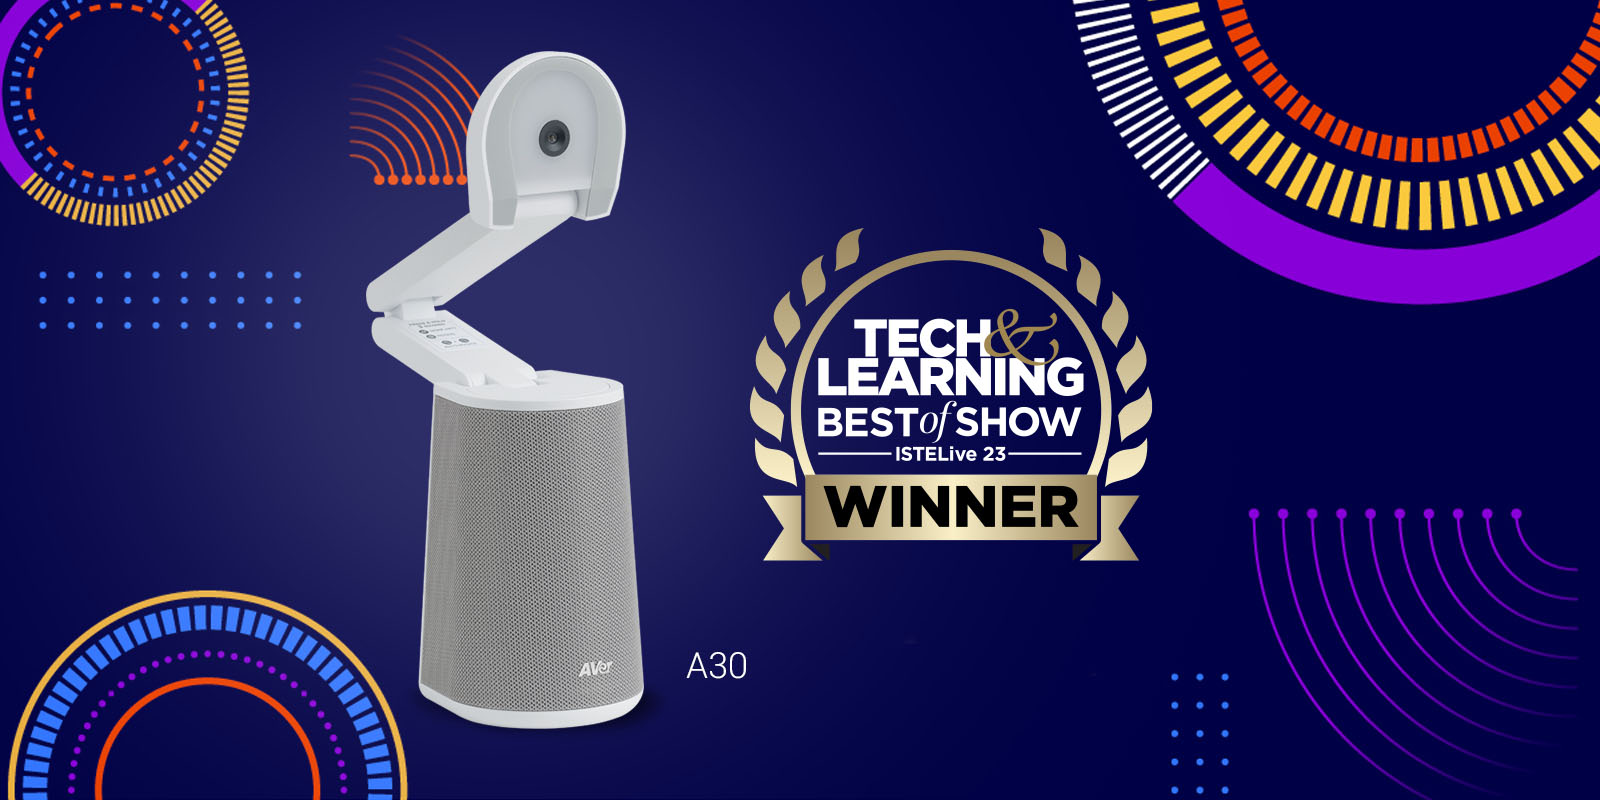 AVer Wins Tech & Learning Best of Show Award at ISTELive 23